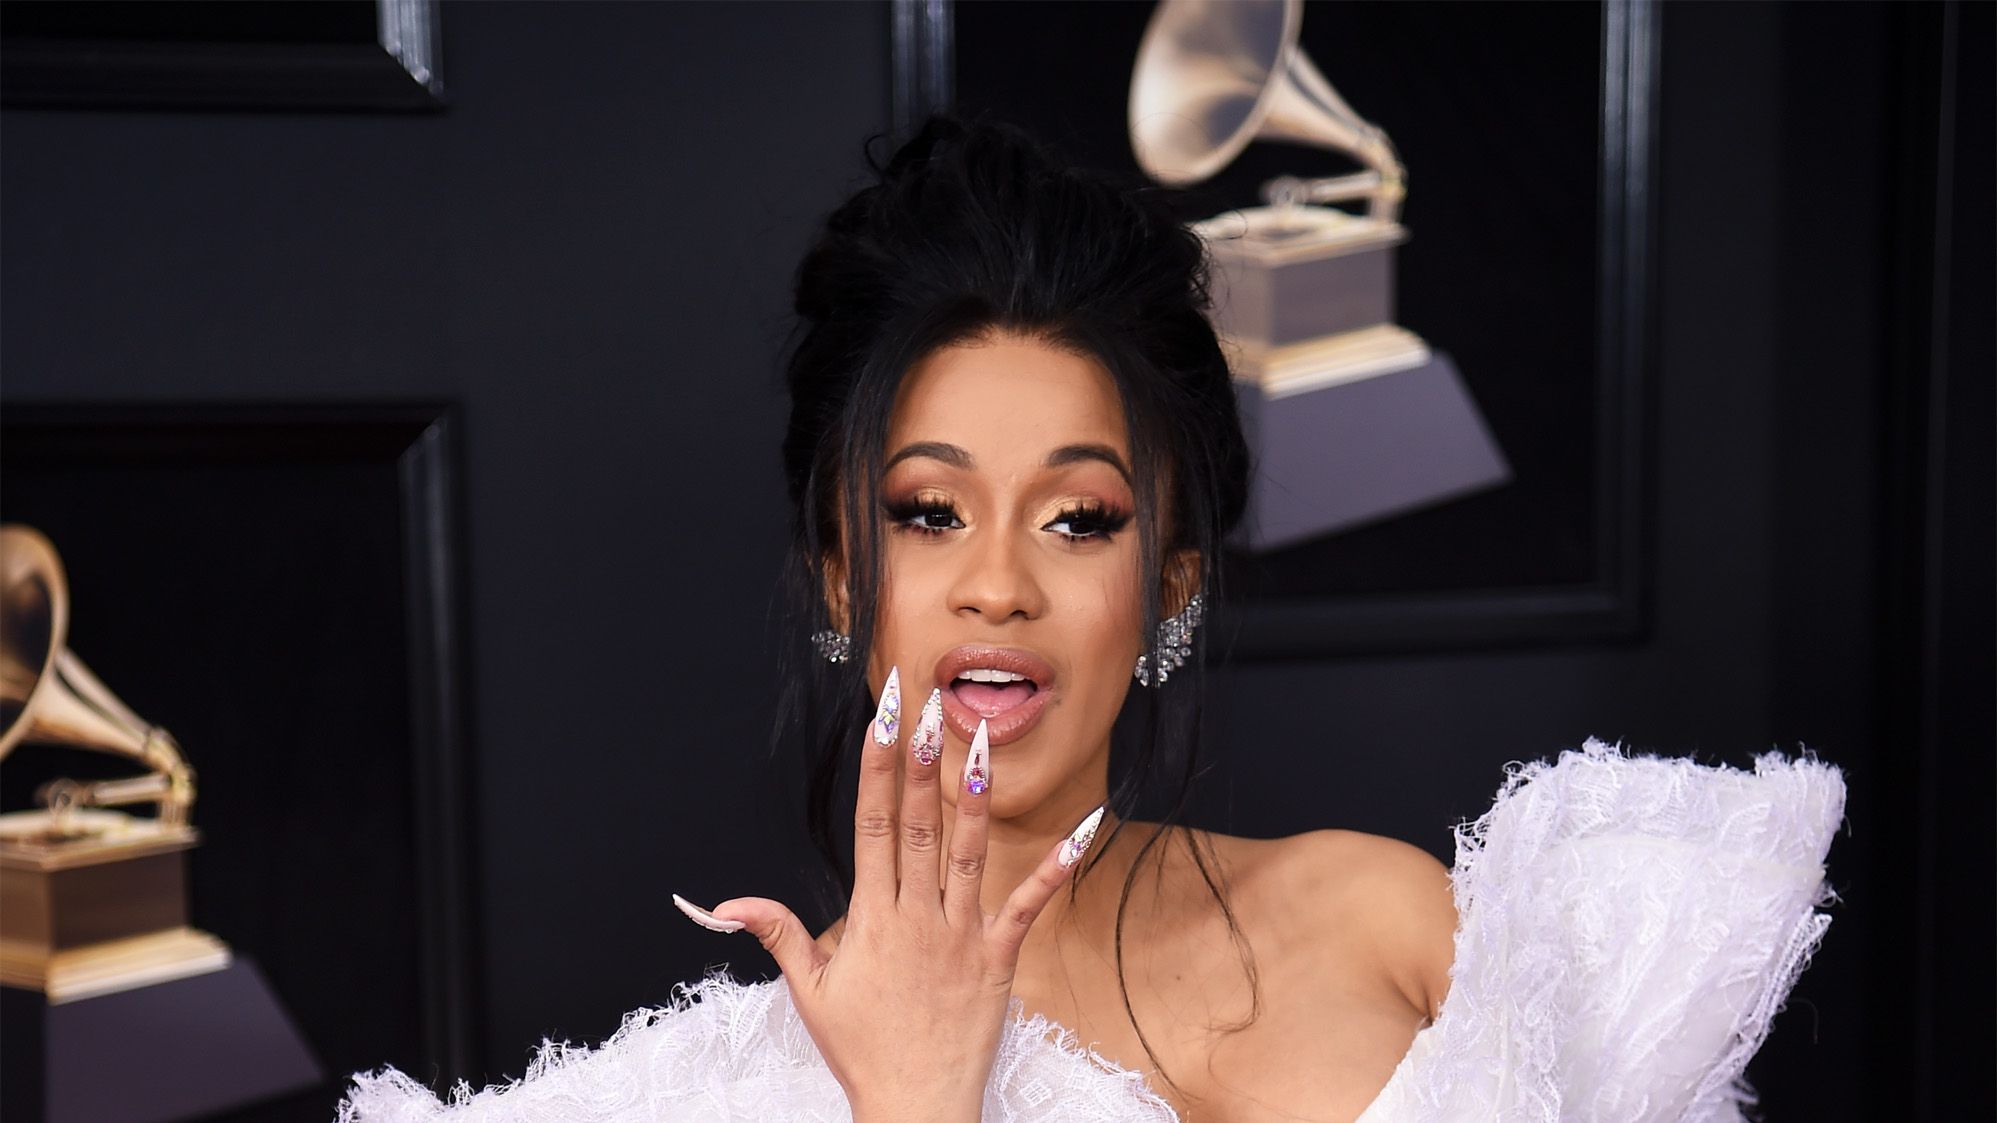 https://hips.hearstapps.com/hmg-prod/images/recording-artist-cardi-b-attends-the-60th-annual-grammy-news-photo-911547572-1560784475.jpg?crop=1xw:0.37444xh;center,top